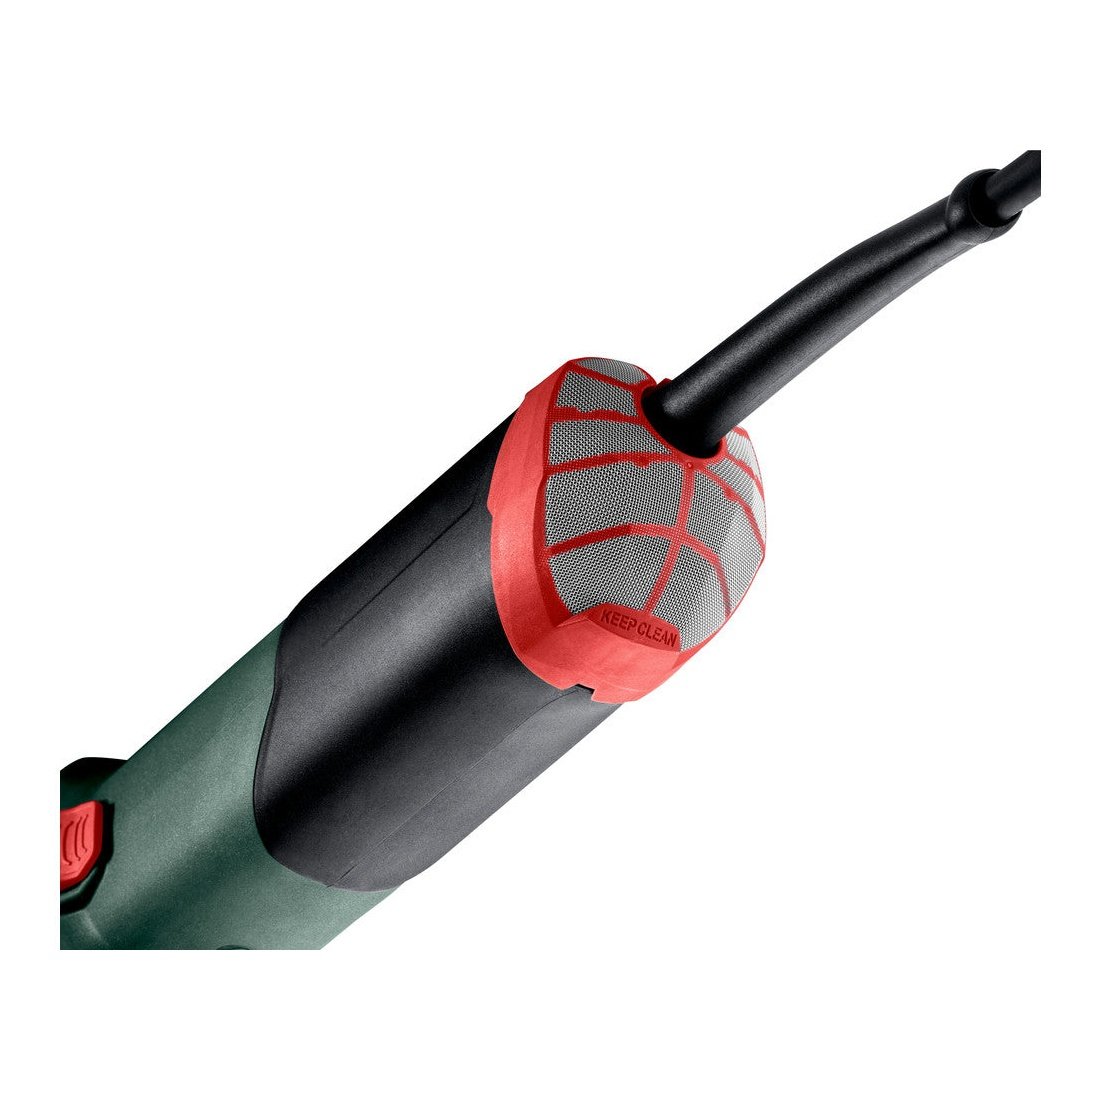 METABO 1900W 125MM VARIABLE SPEED  ANGLE GRINDER (WEV19-125QMBRUSH)